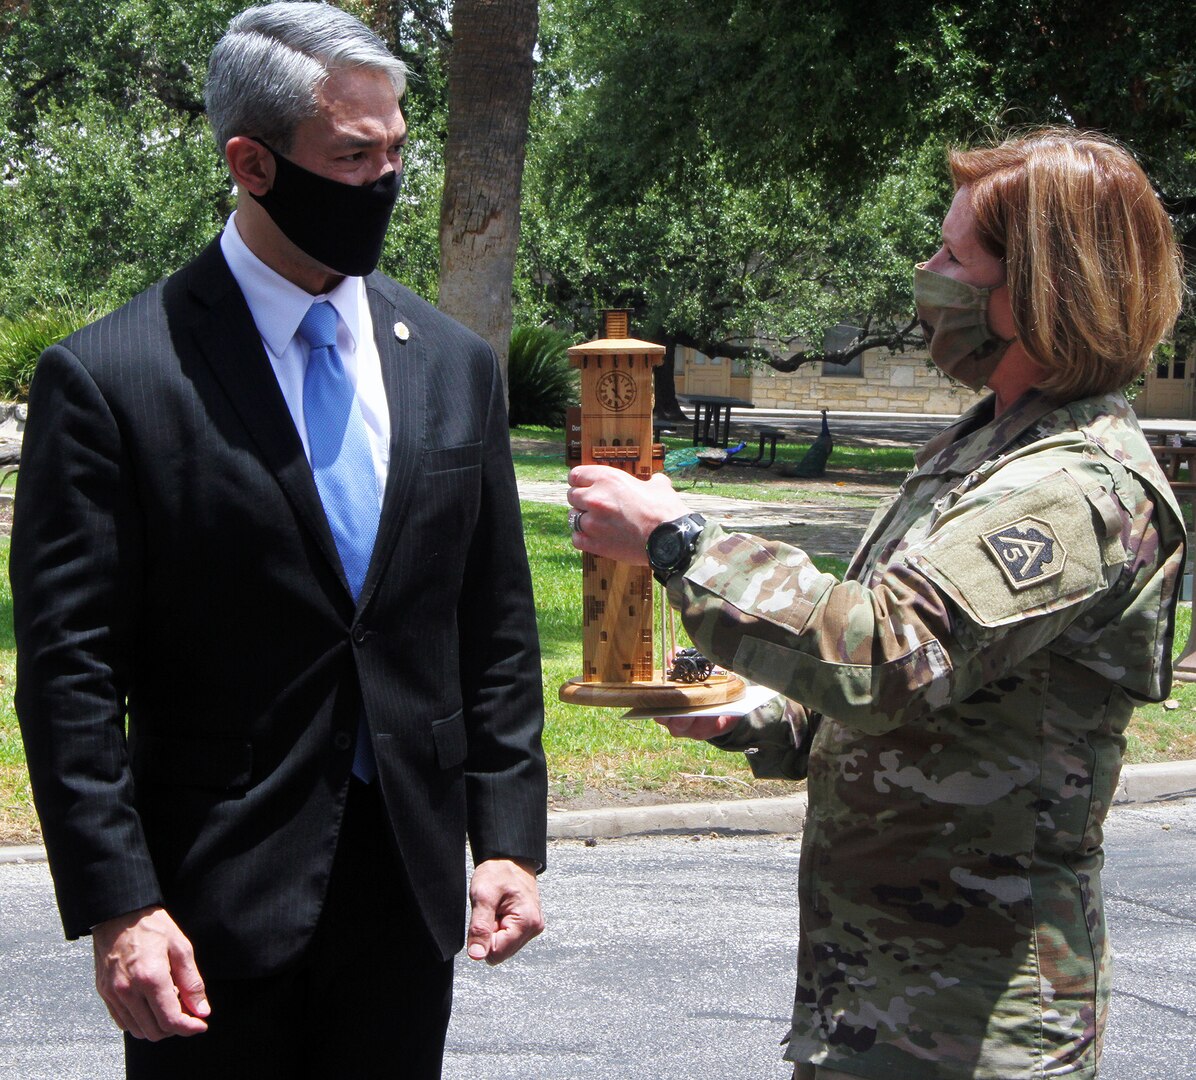 Lt. Gen. Laura J. Richardson (right), commanding general of U.S. Army North (Fifth Army) and the Joint Force Land Component Command, presents San Antonio Mayor Ron Nirenberg with a replica of the historic Fort Sam Houston Quadrangle during his visit to Fort Sam Houston July 29. U.S. Army North leaders were able to update City of San Antonio officials on their day-to-day mission, as well as the response against the COVID-19 pandemic, which includes hospitals across San Antonio.